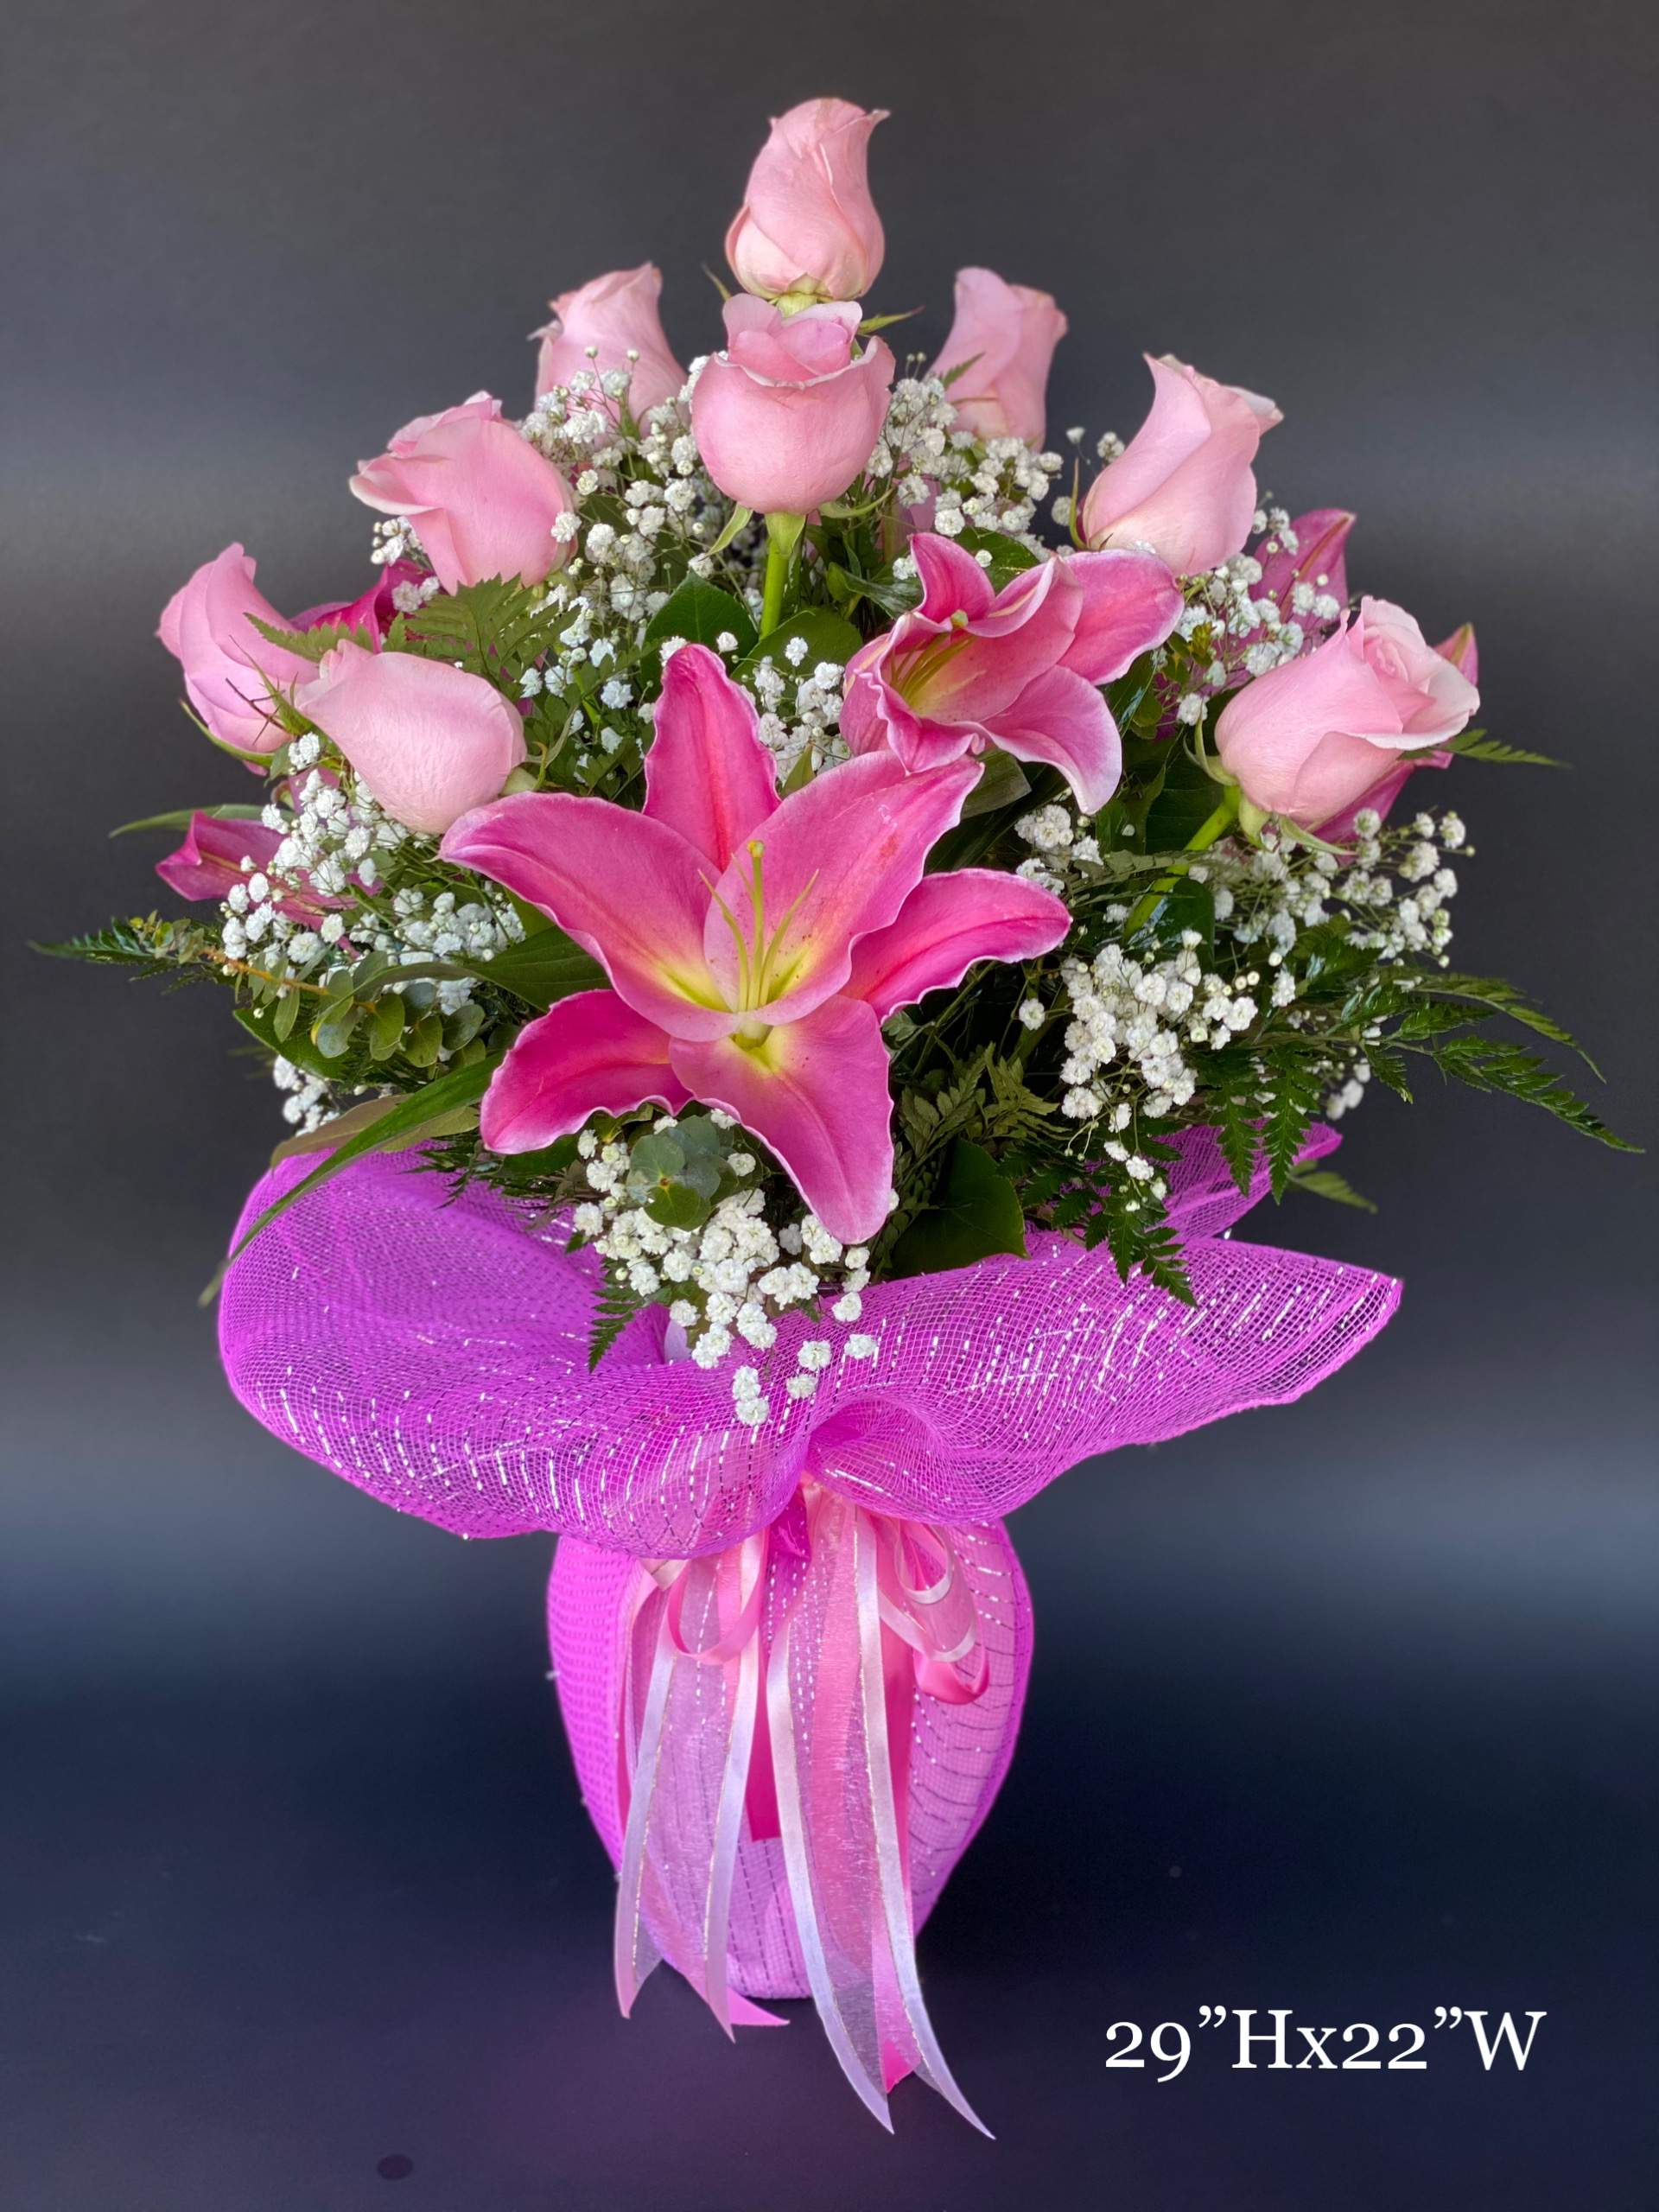 Blooming Roses With Love
$149.99 + Tax